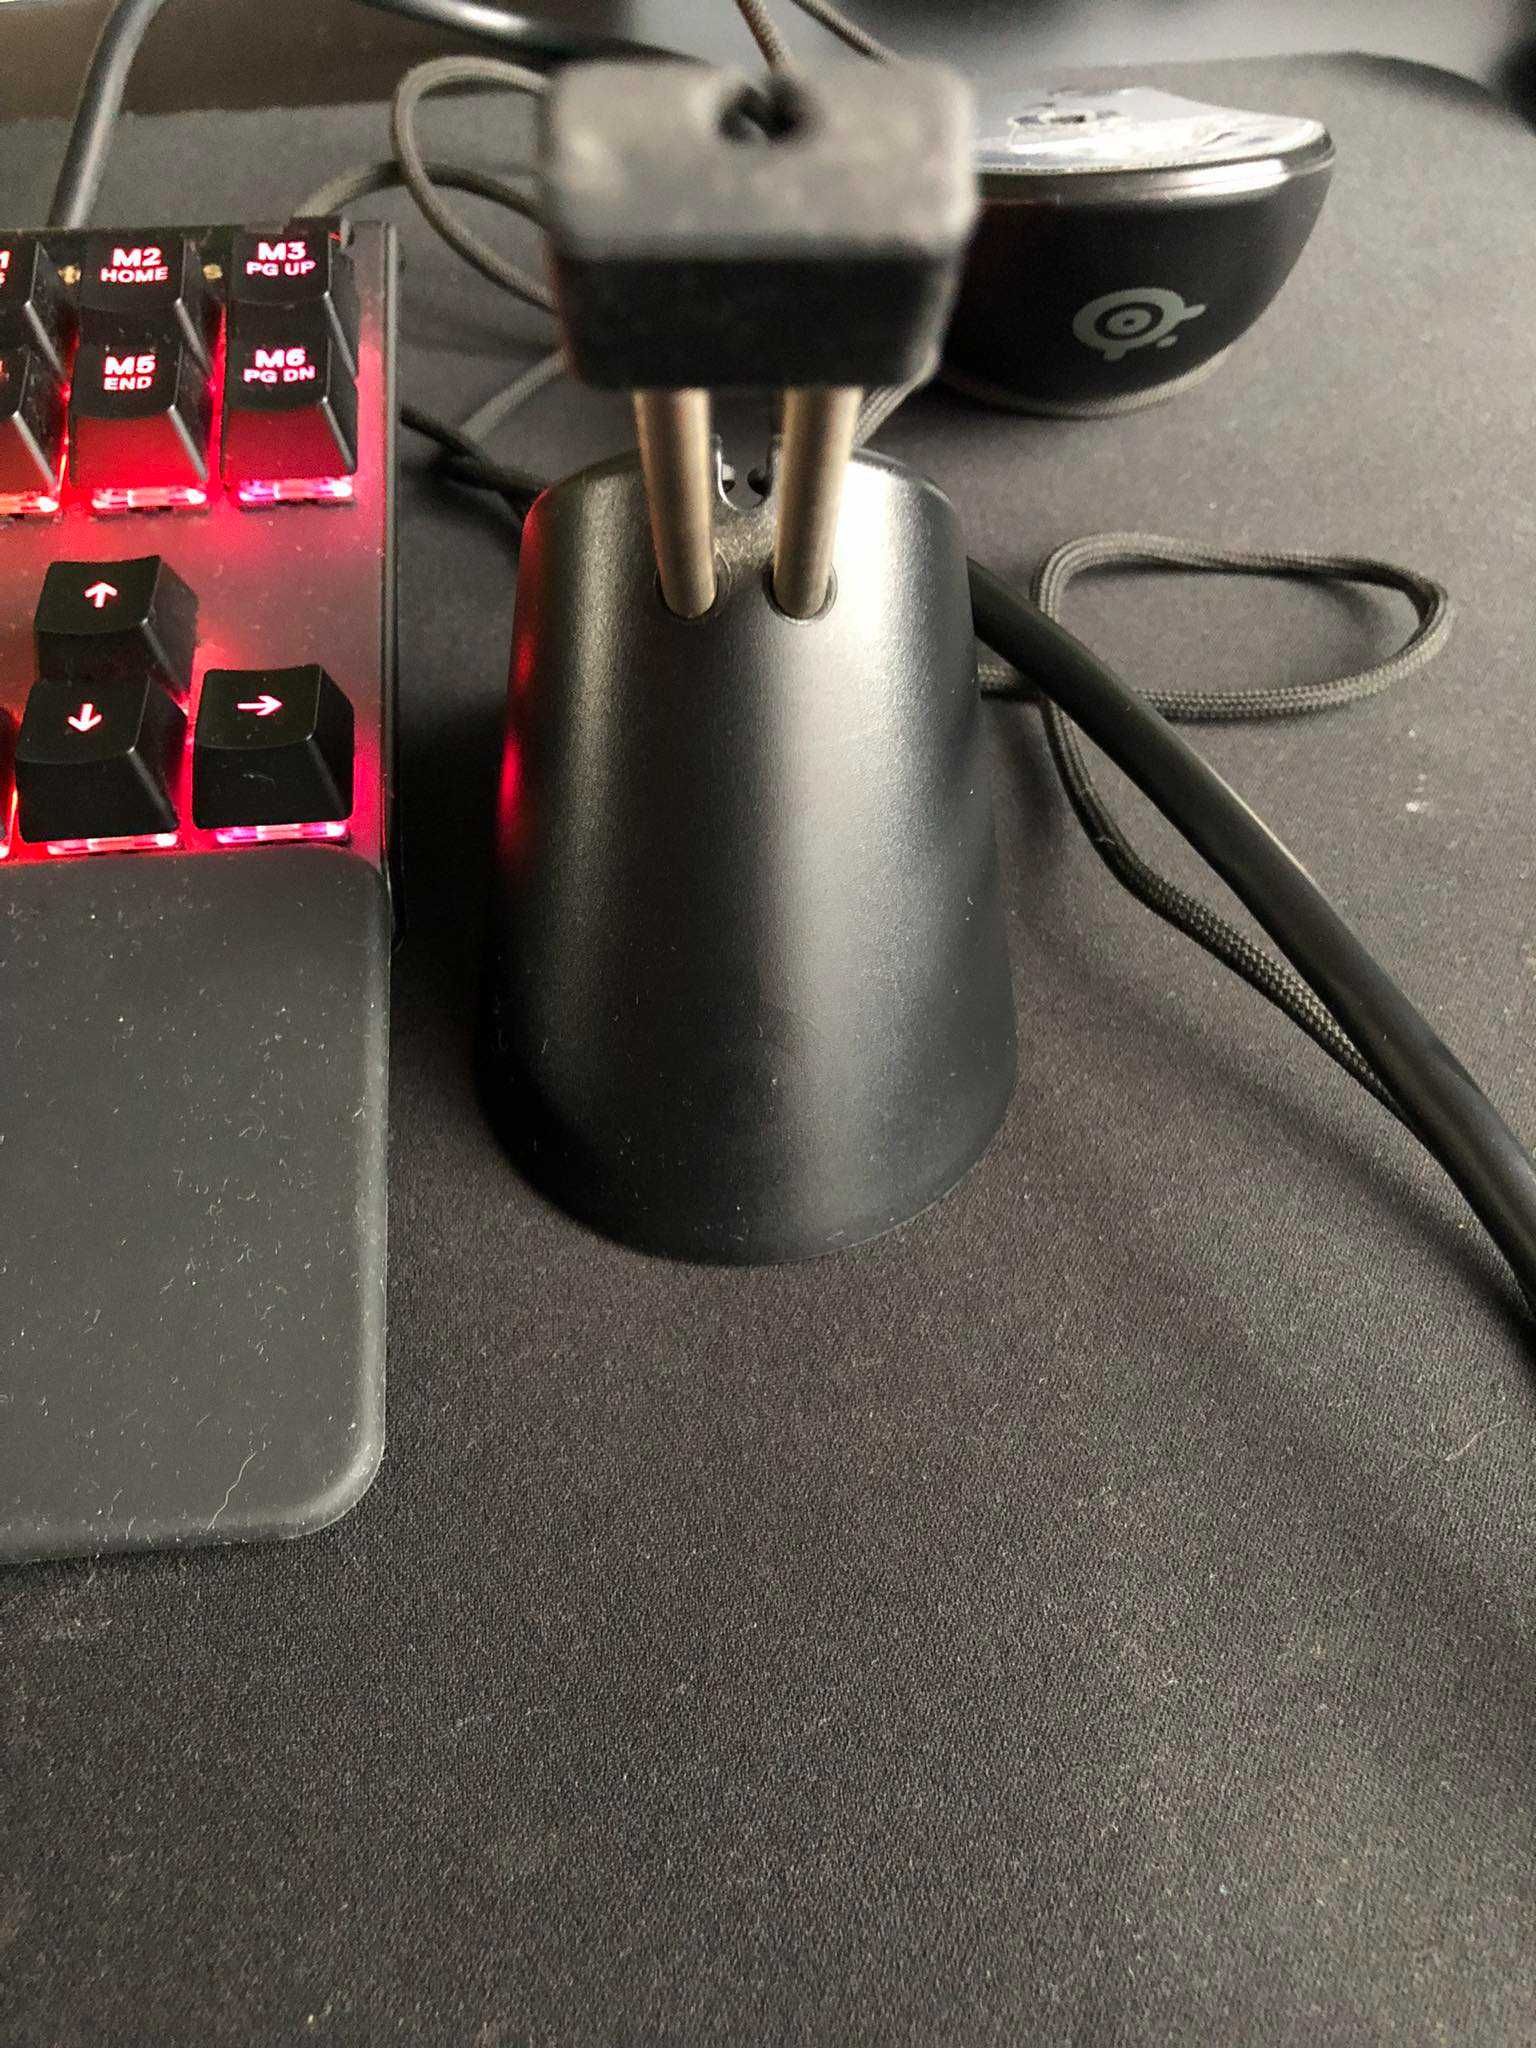 SteelSeries Mouse Bungee